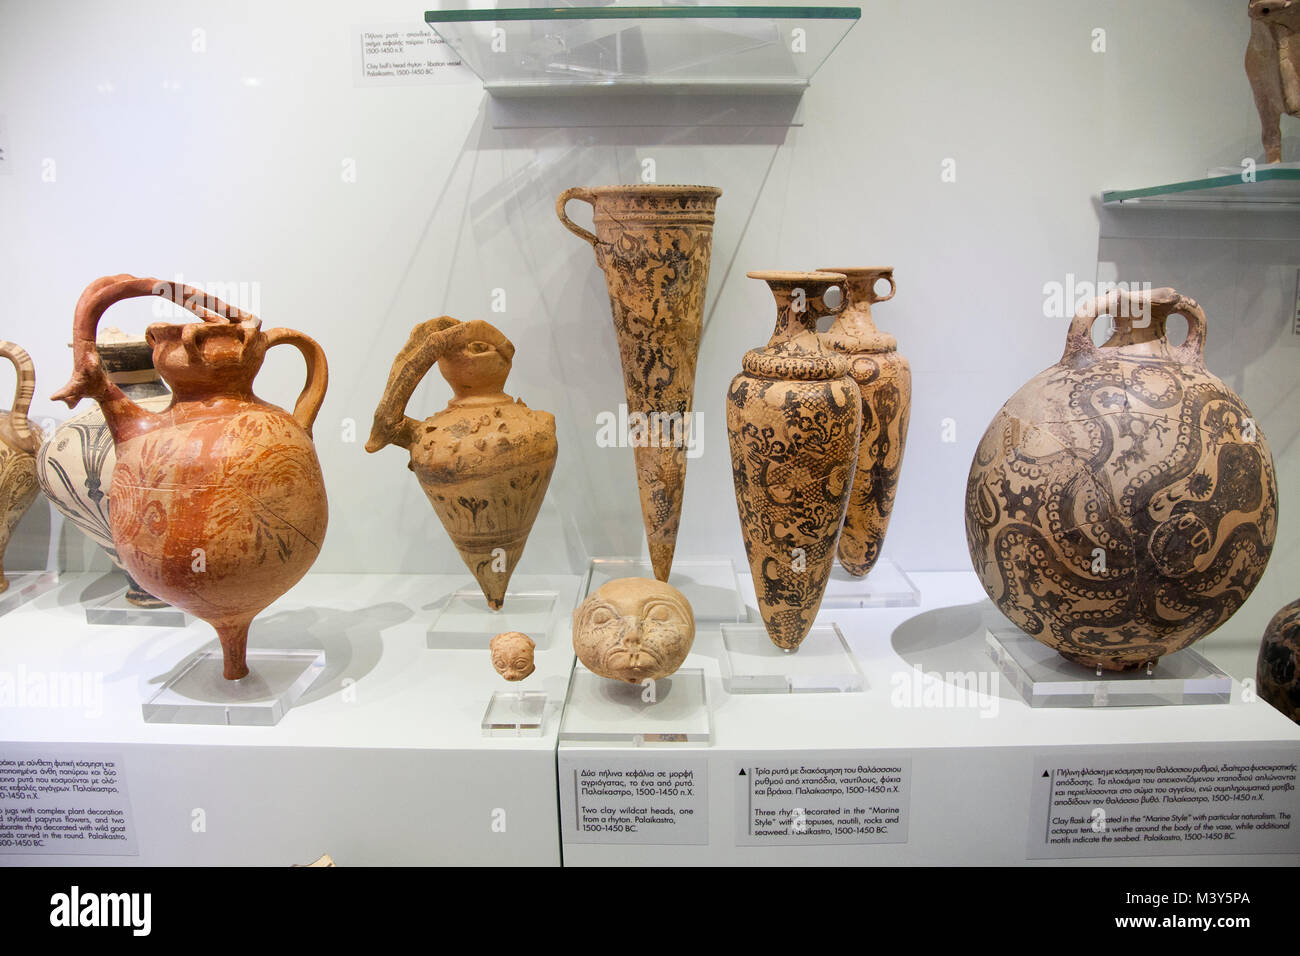 Clay flask, jugs, wildcat heads and rhyta from Palaikastro dated 1500-1450 BC, Archaeological Museum of Heraklion, Iraklio, island of Crete, Greece, E Stock Photo